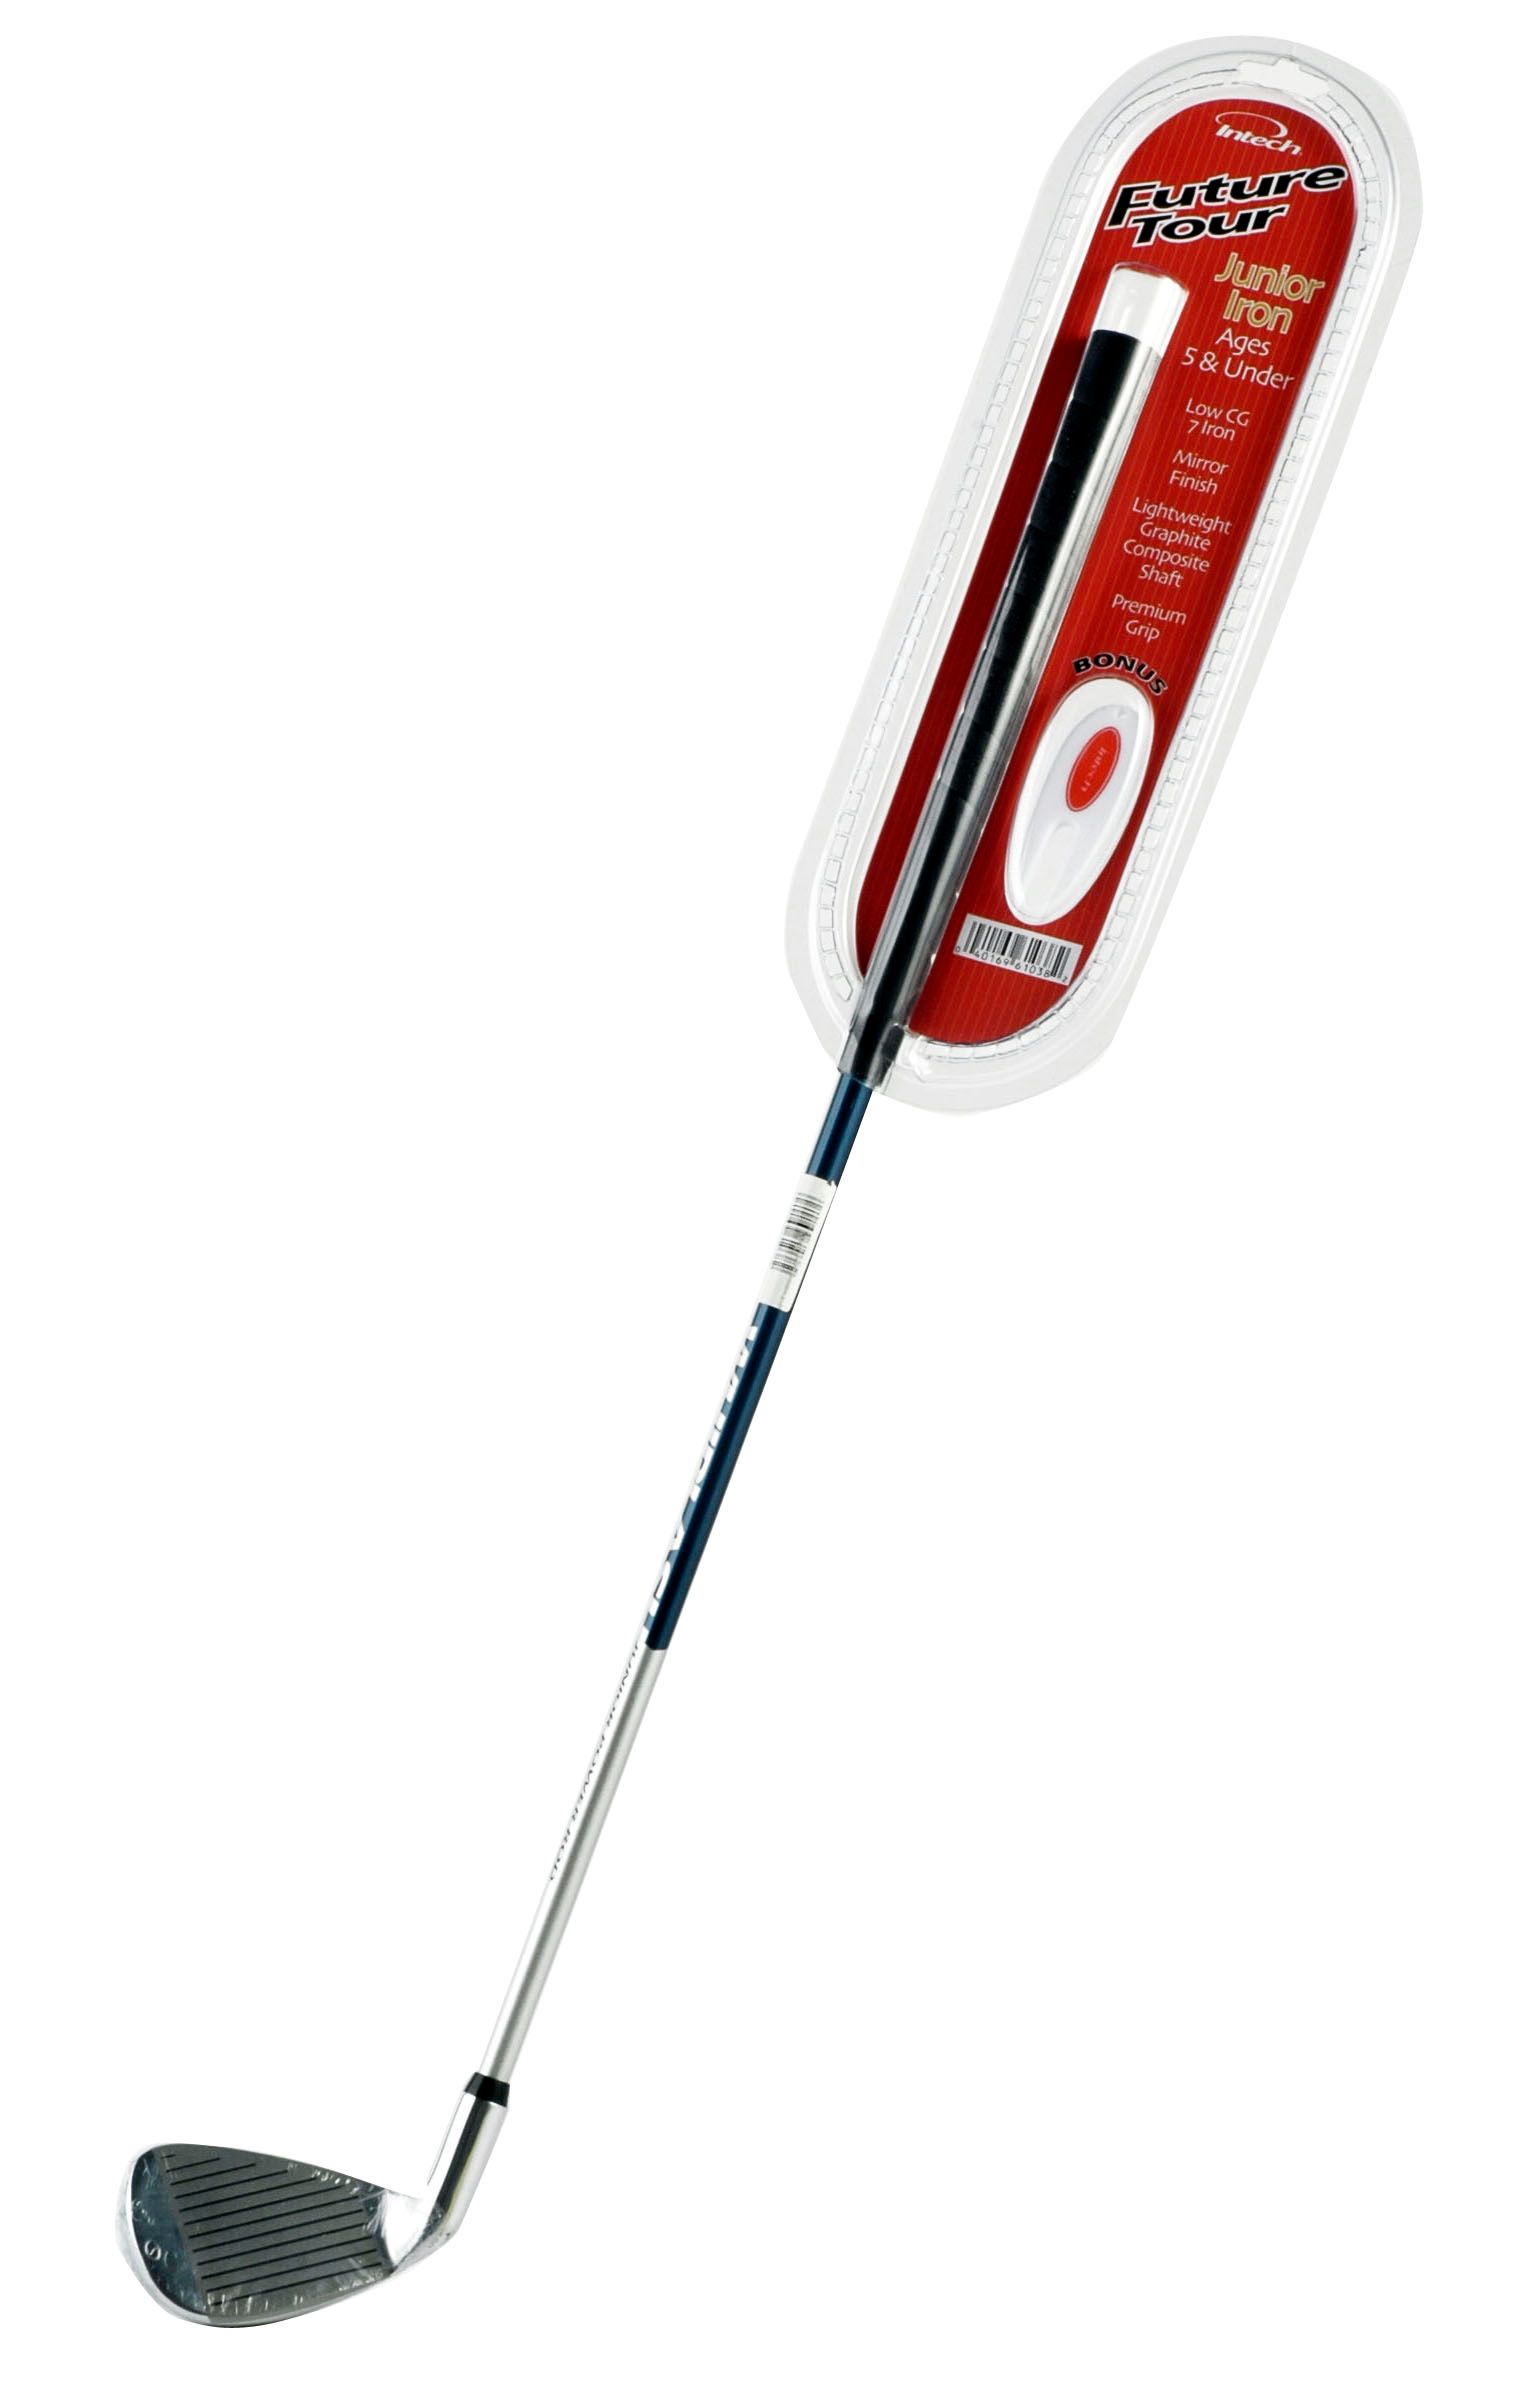 Knight Golf Products Future Tour Pee Wee 7-Iron